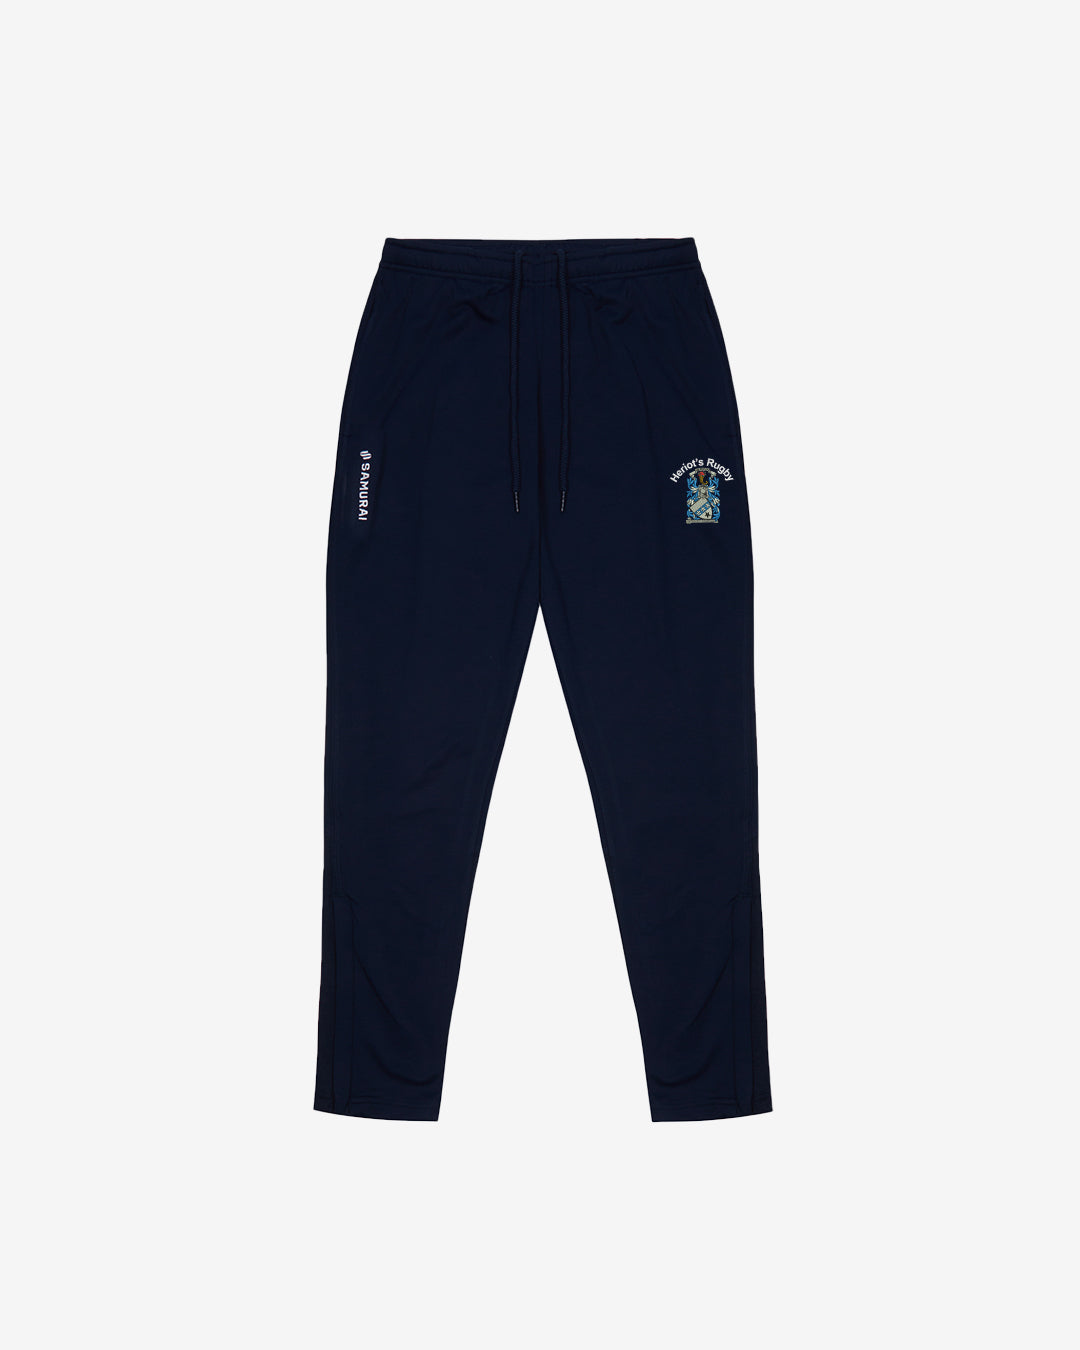 Heriot's Rugby Club - U:0200 - Men's Tapered Training Pant - Navy